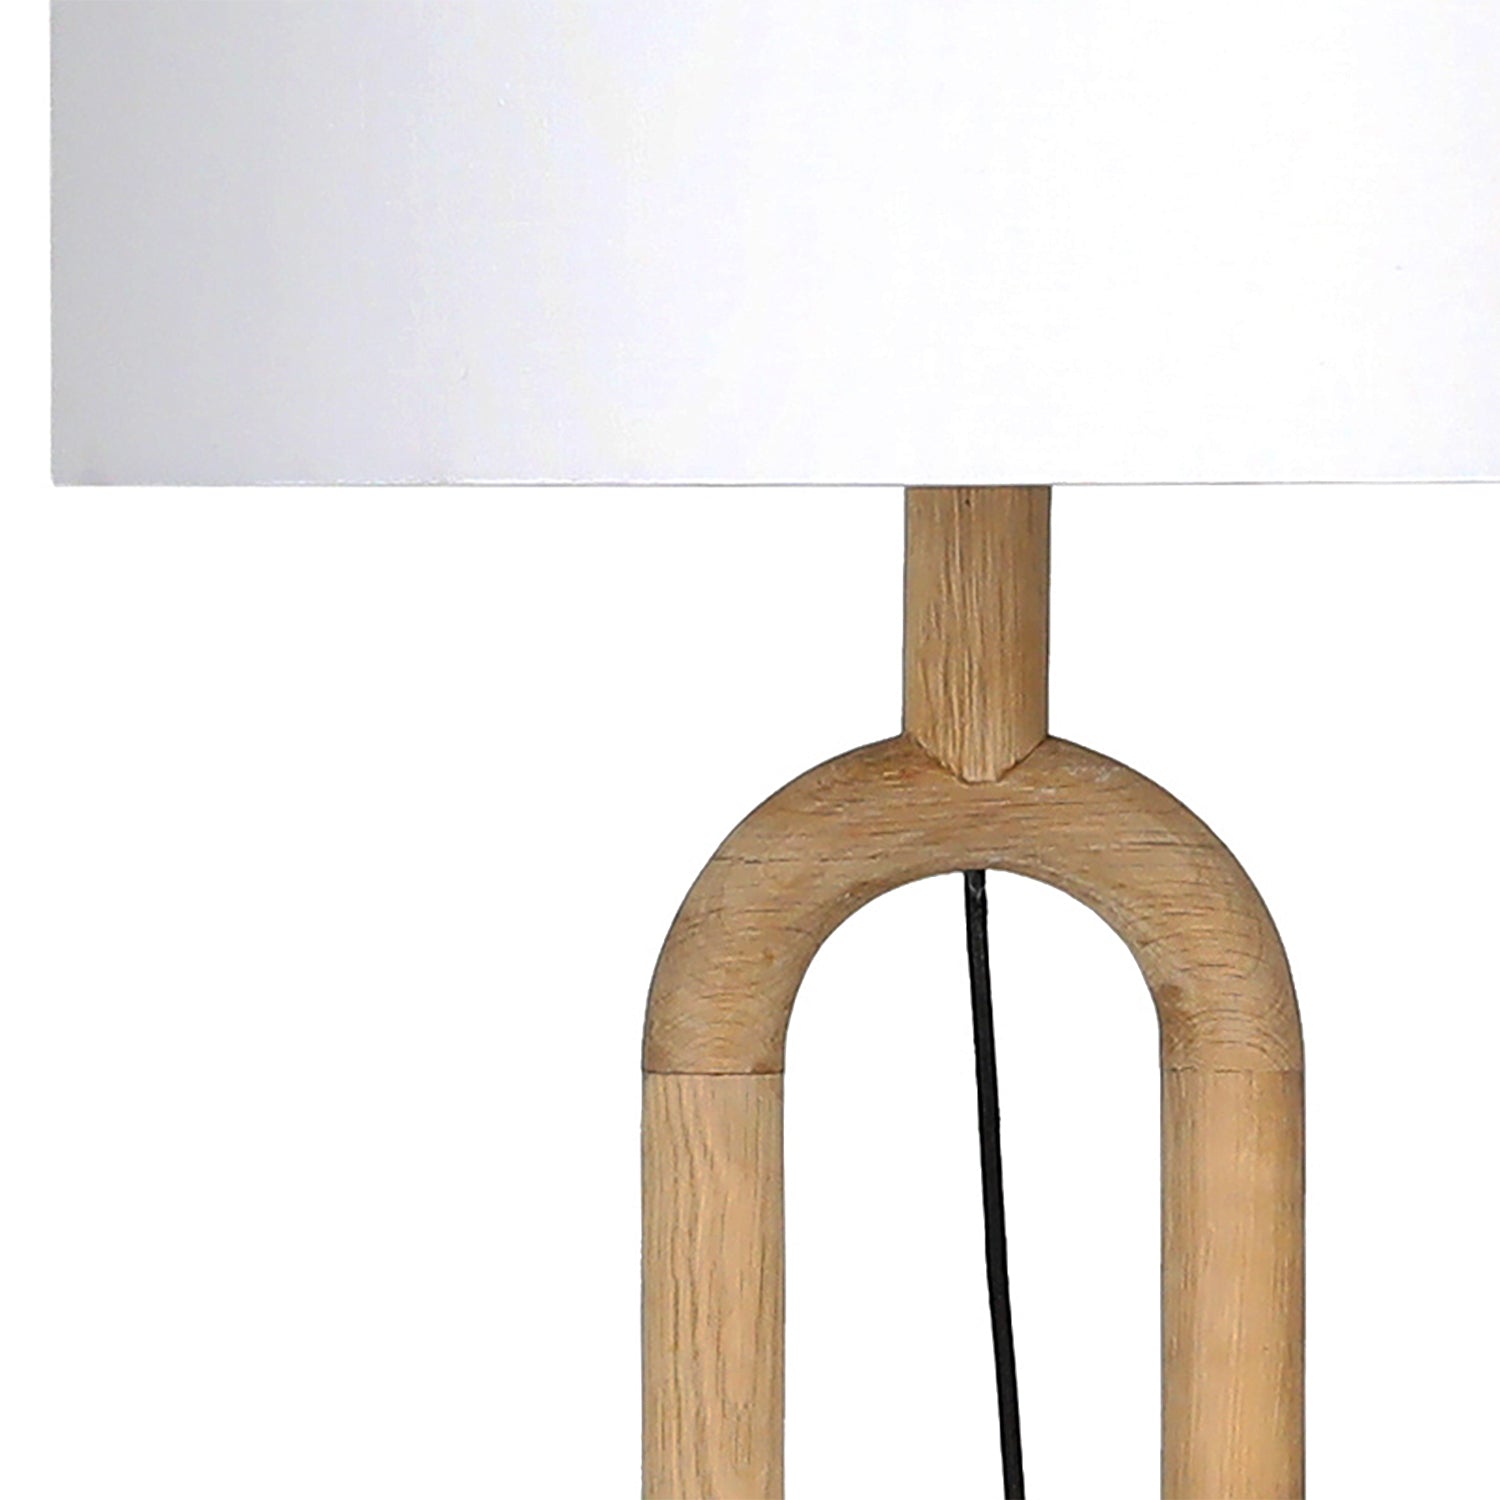 Add solid texture to your home with this contemporary oak wood floor lamp. Featuring a white linen lampshade and an open-arch wooden stand, this floor lamp makes a striking statement in a living room, den, or bedroom. The slim, minimalist design makes it effortlessly easy to fit various décor styles.Depth : 19.5 in Amethyst Home provides interior design, new home construction design consulting, vintage area rugs, and lighting in the Newport Beach metro area.